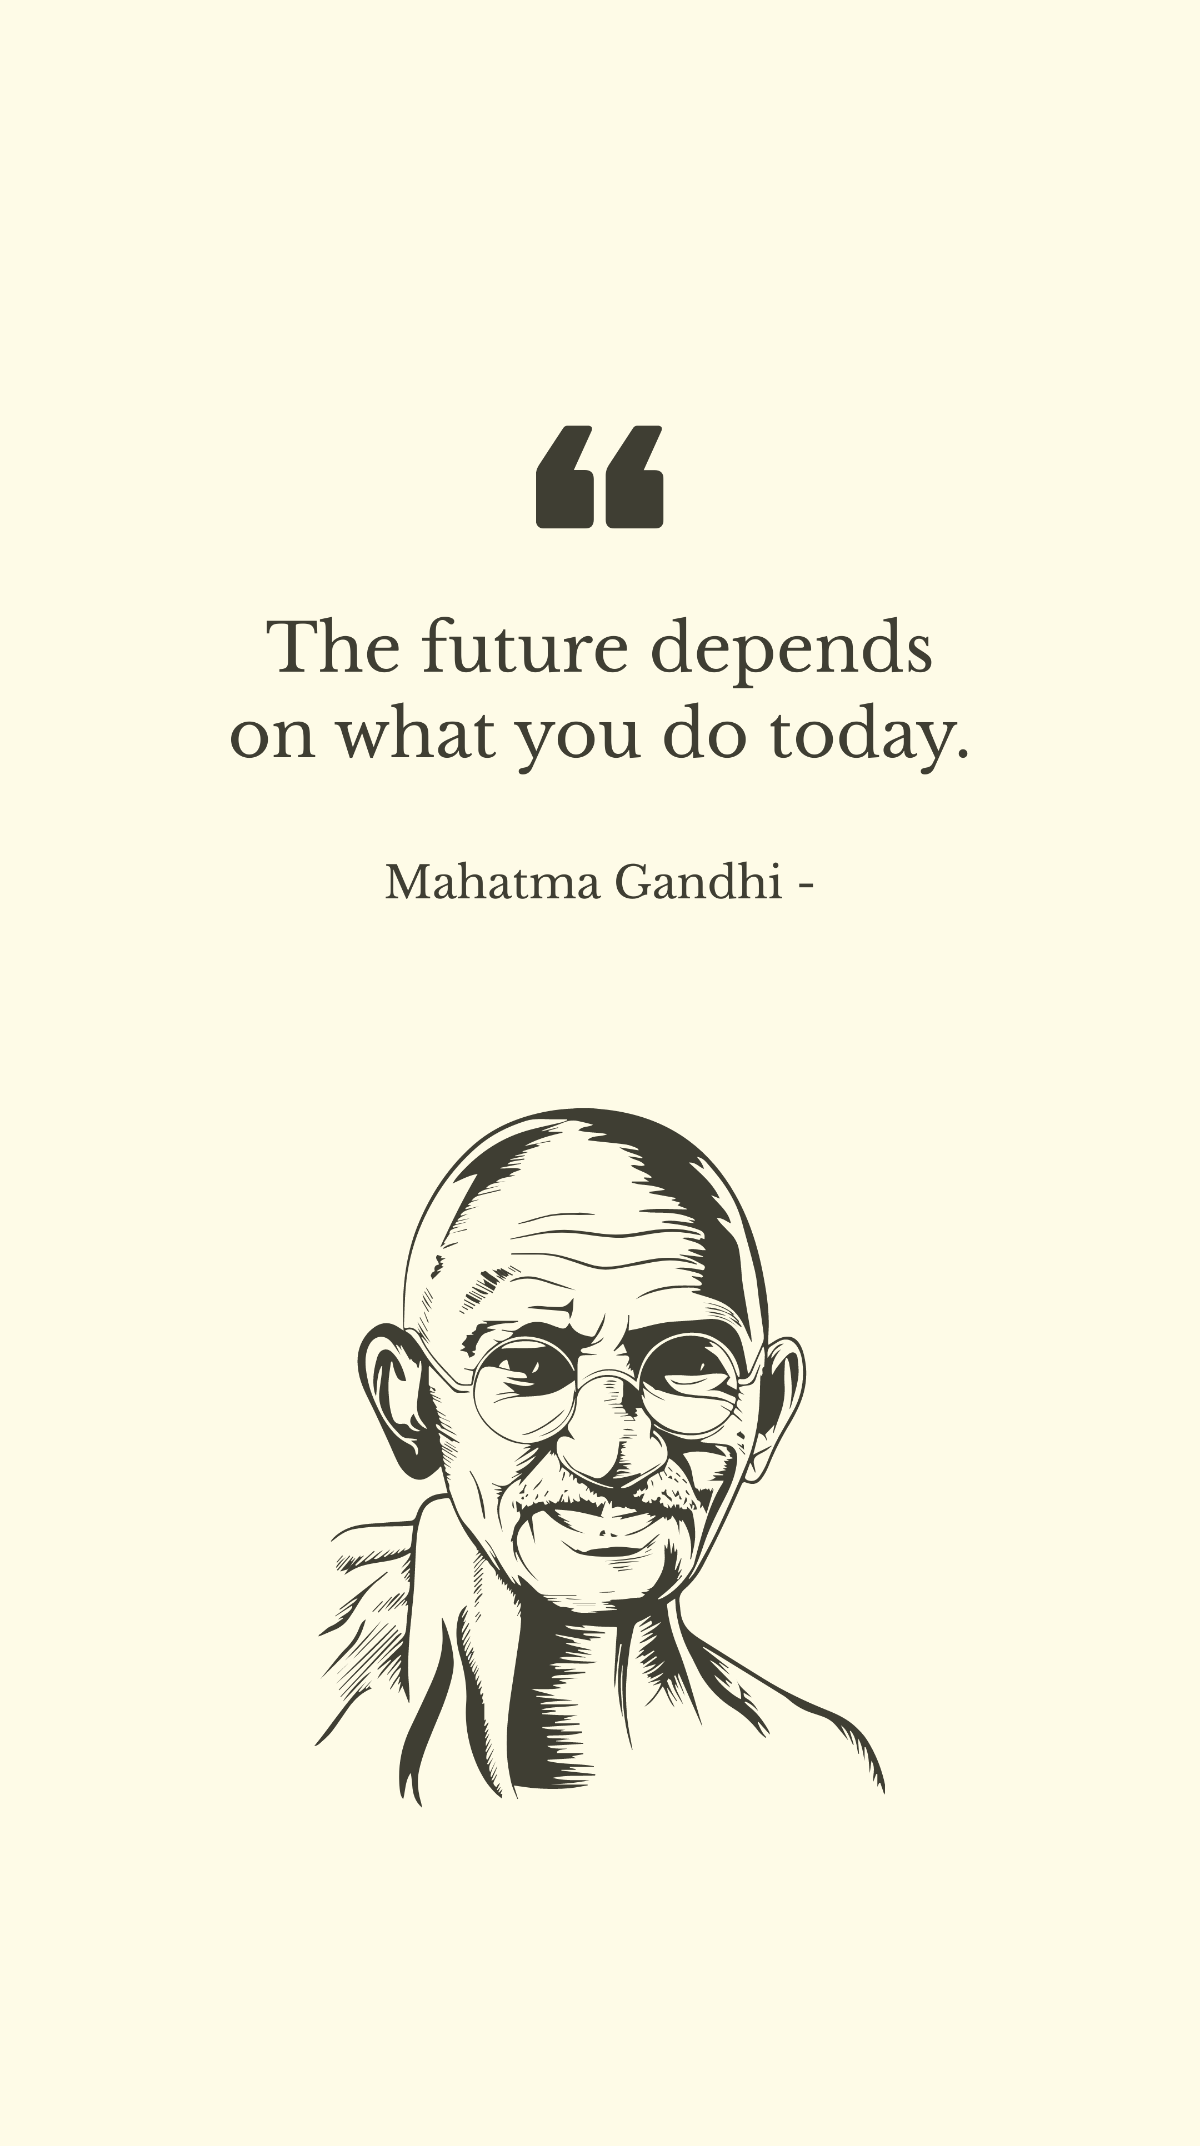 Mahatma Gandhi - The future depends on what you do today. Template